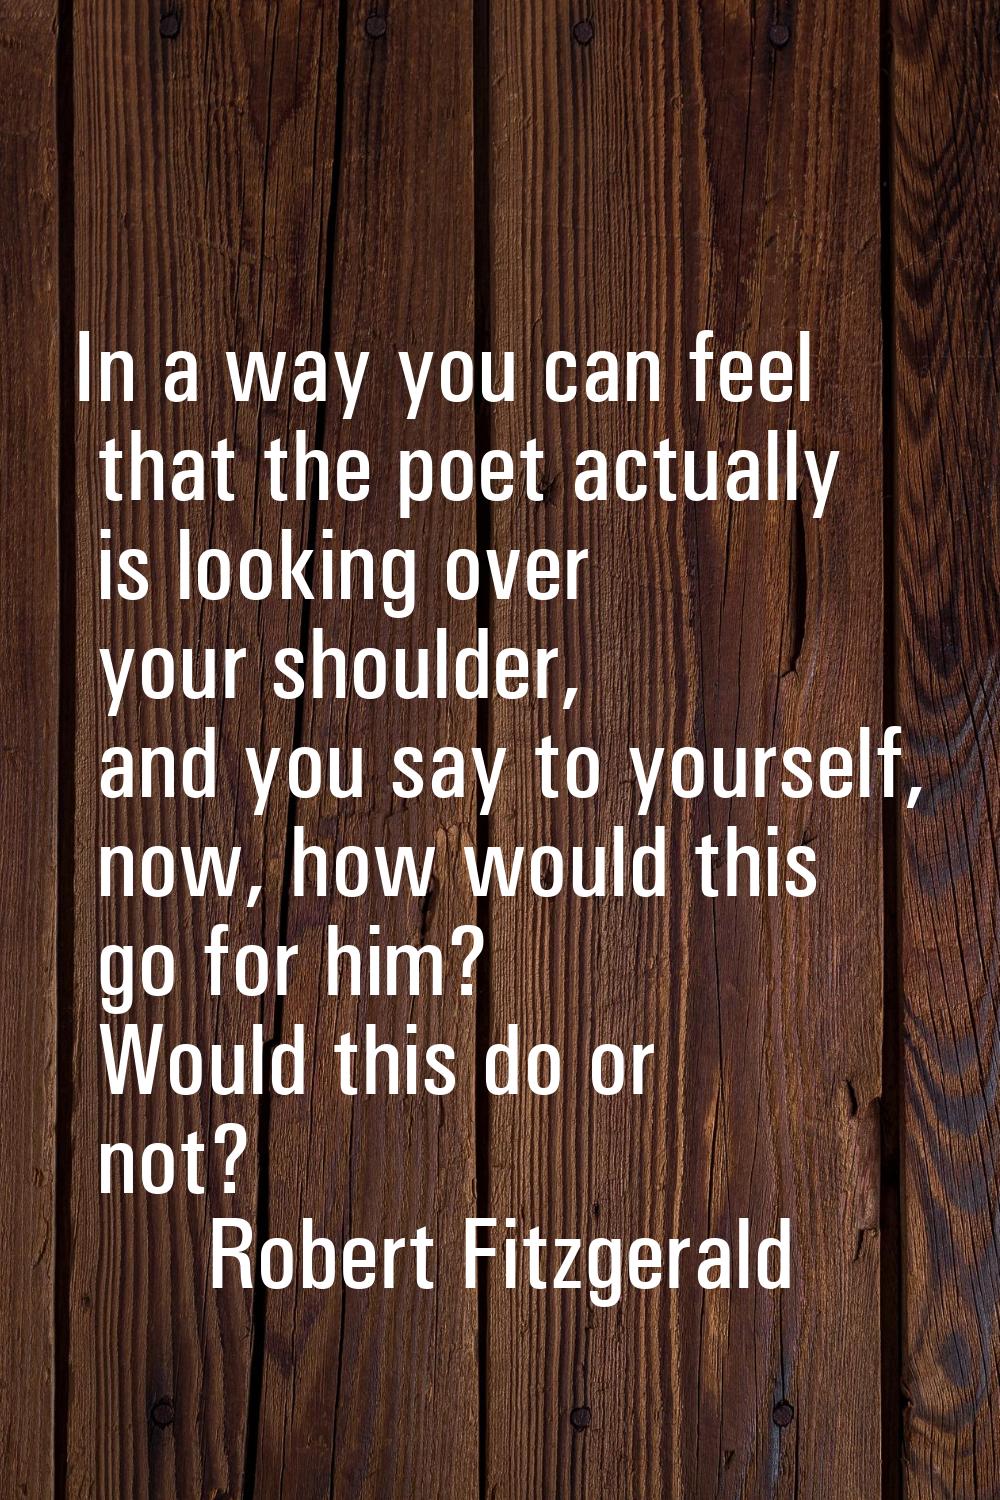 In a way you can feel that the poet actually is looking over your shoulder, and you say to yourself